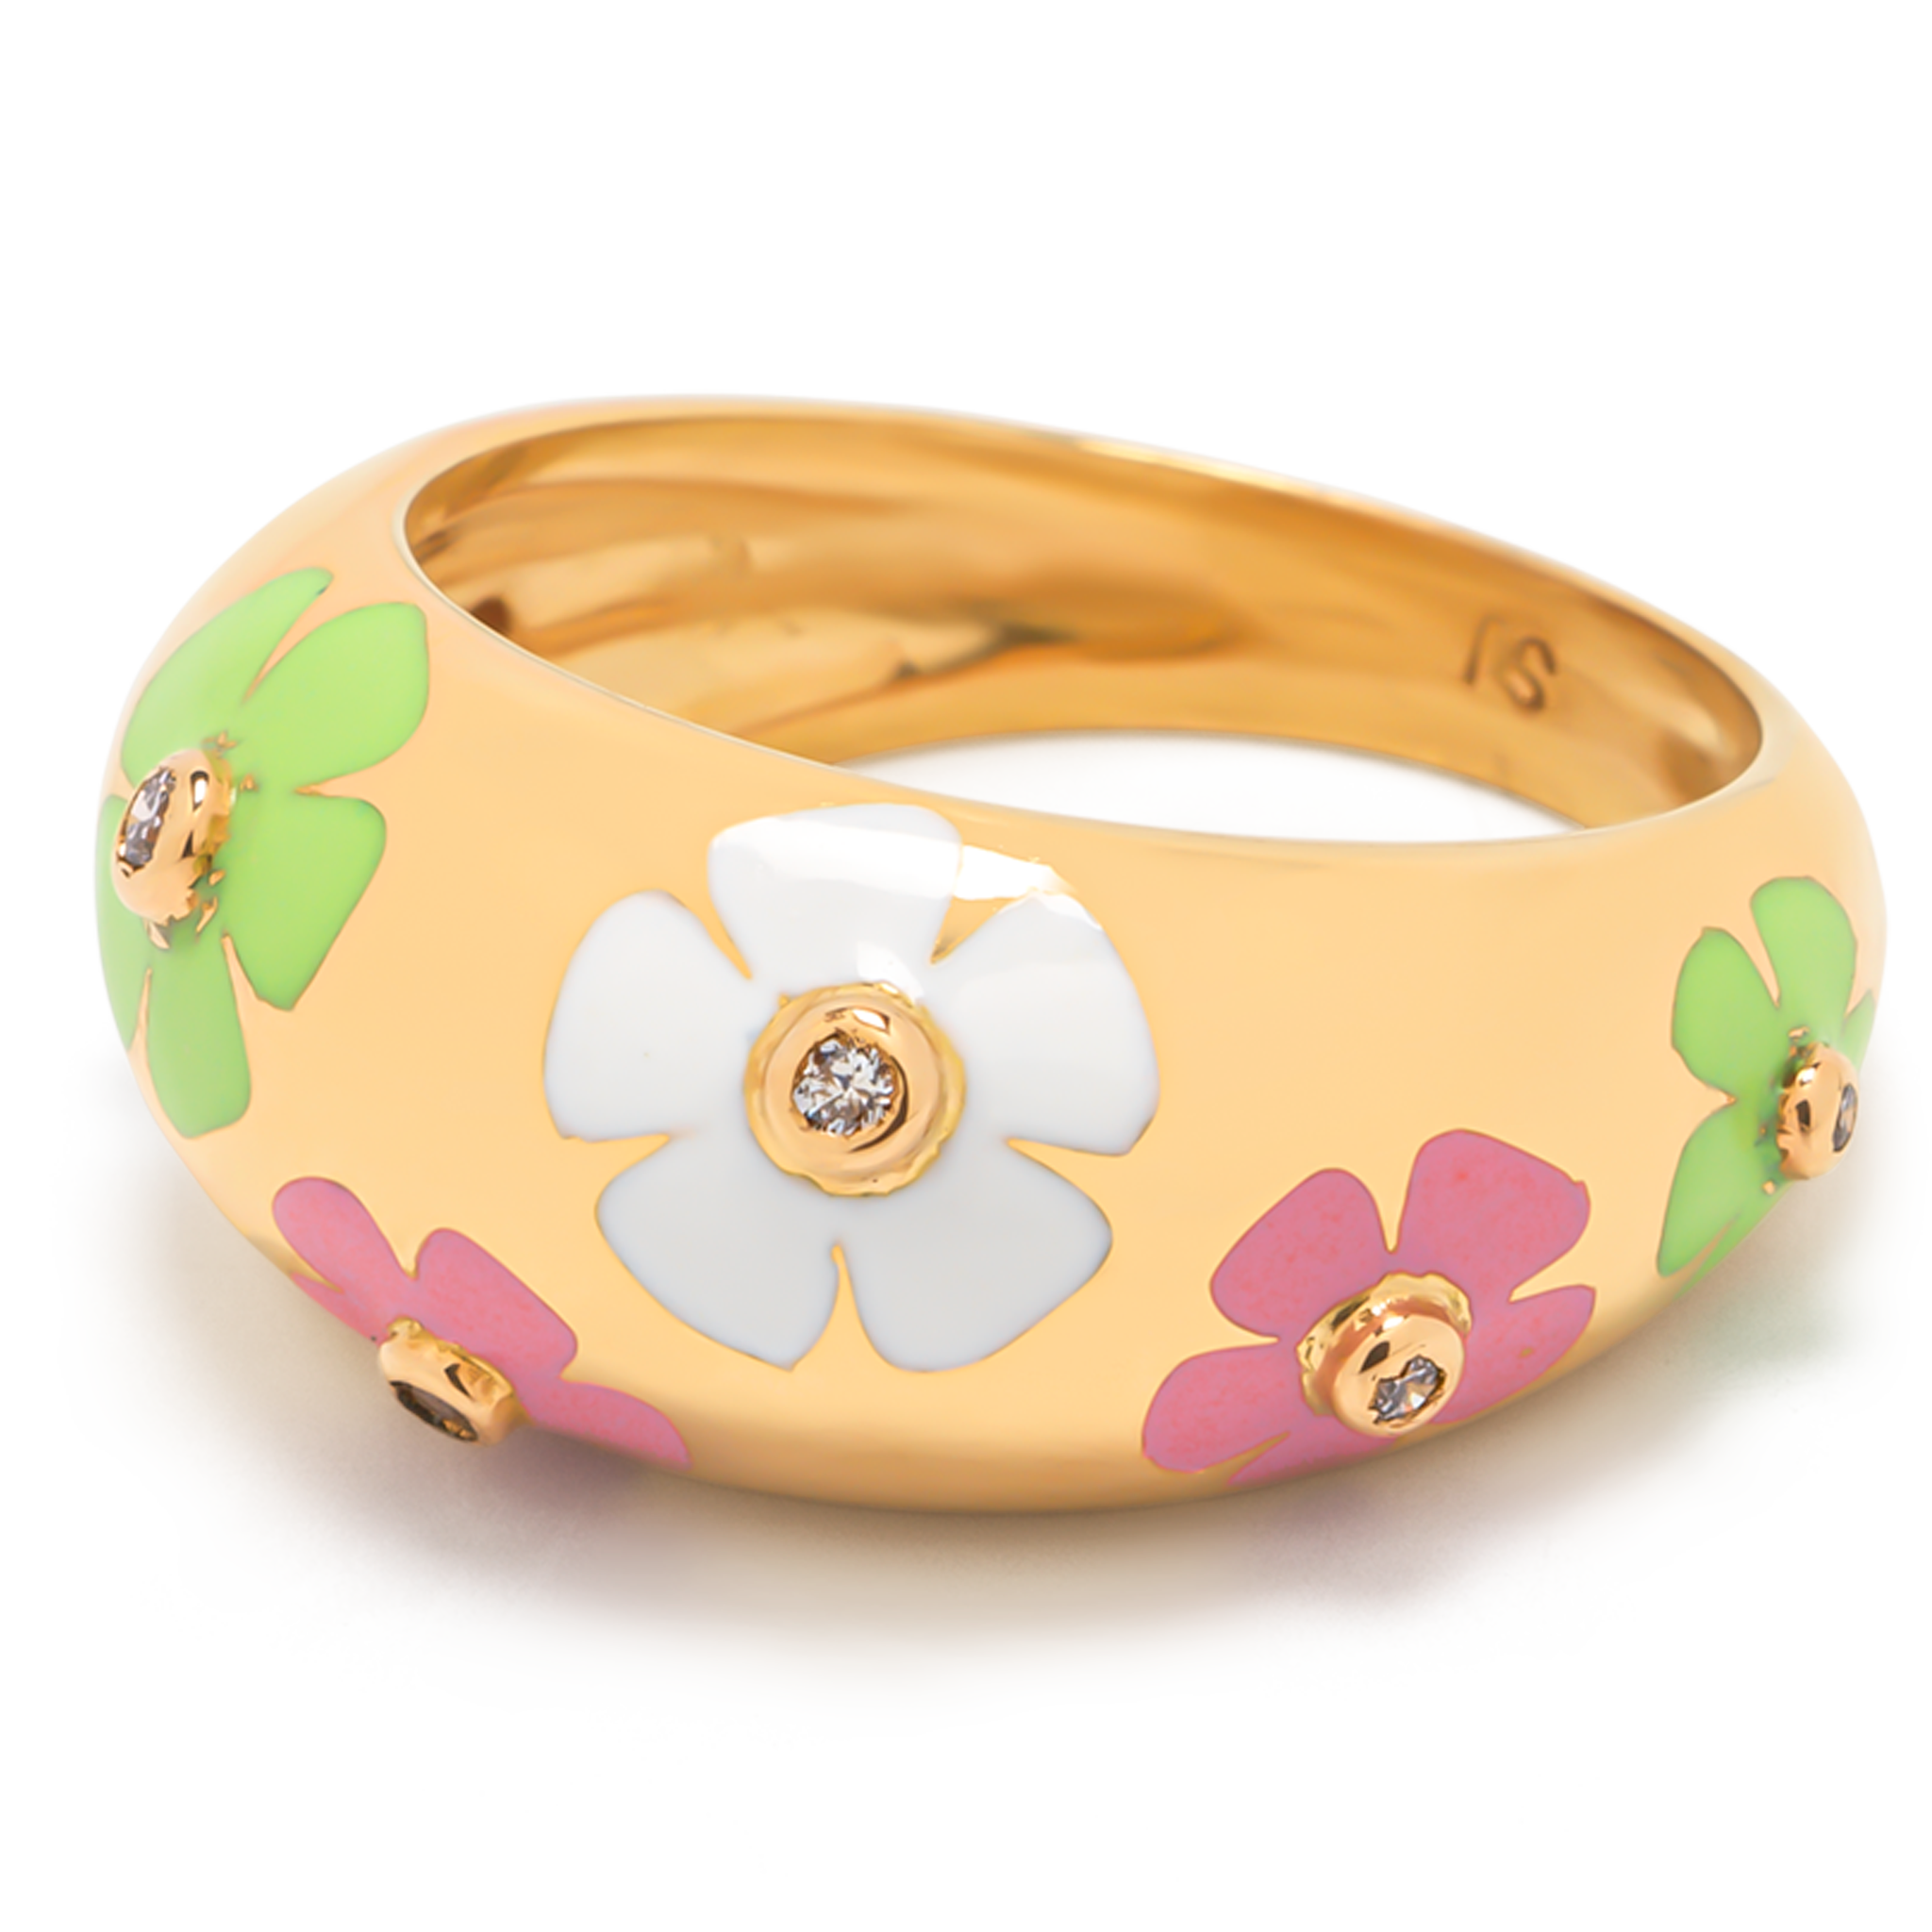 Flower Dome Ring